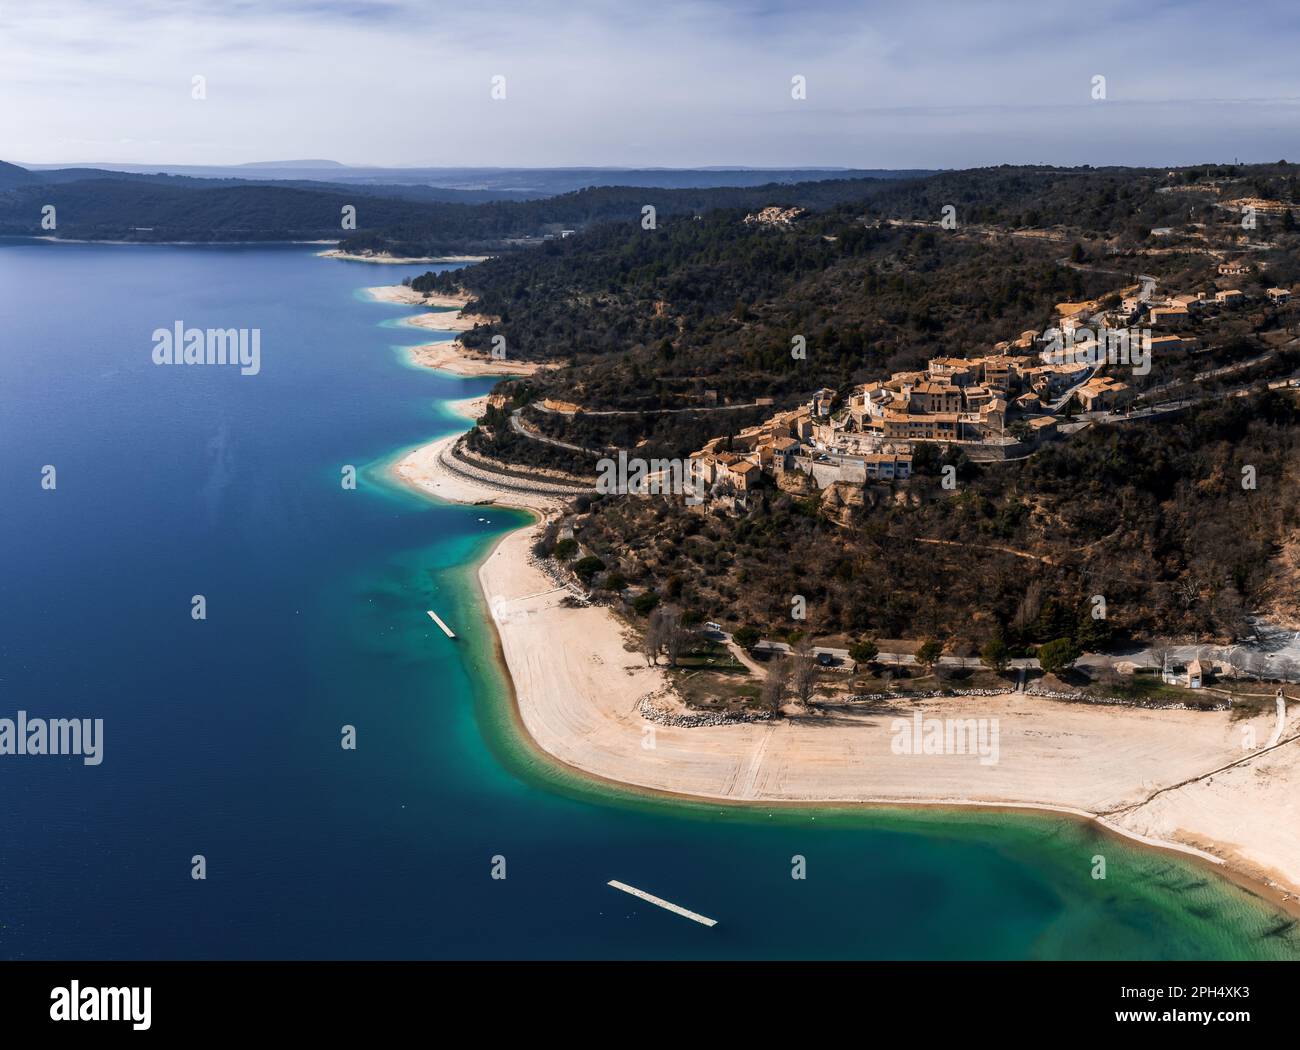 A drone view of the lake and village of Sainte-Croix-du-Verdon in the Haute Provence refion of France Stock Photo